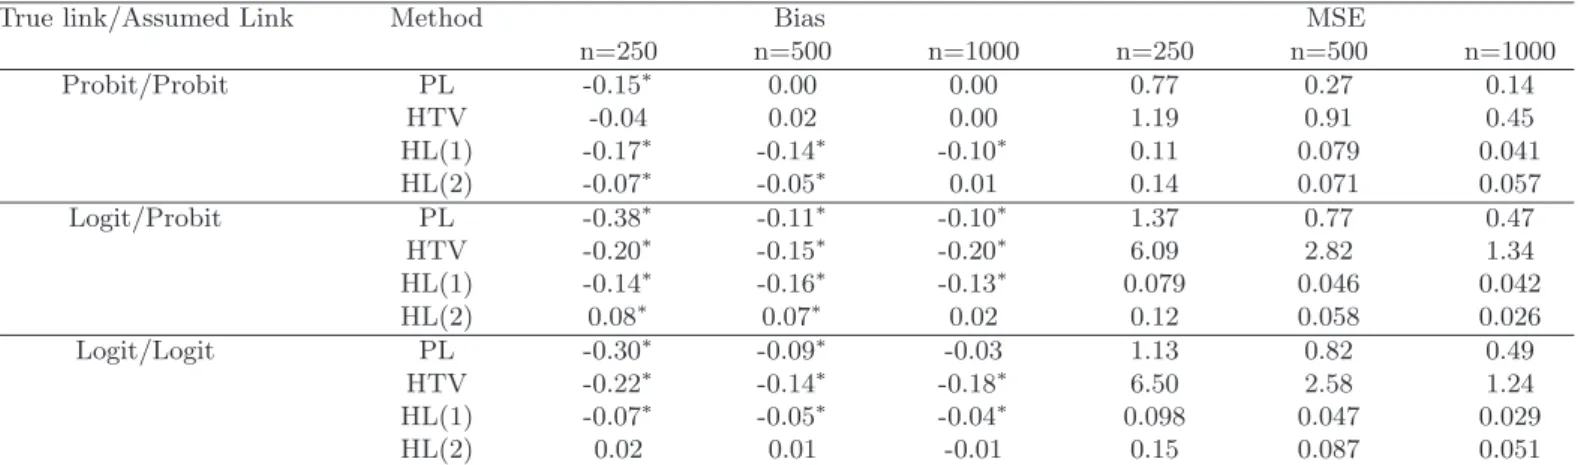 Table 1. Bias and MSE of PL and HTV under different misspecification of the link function in the selection model.